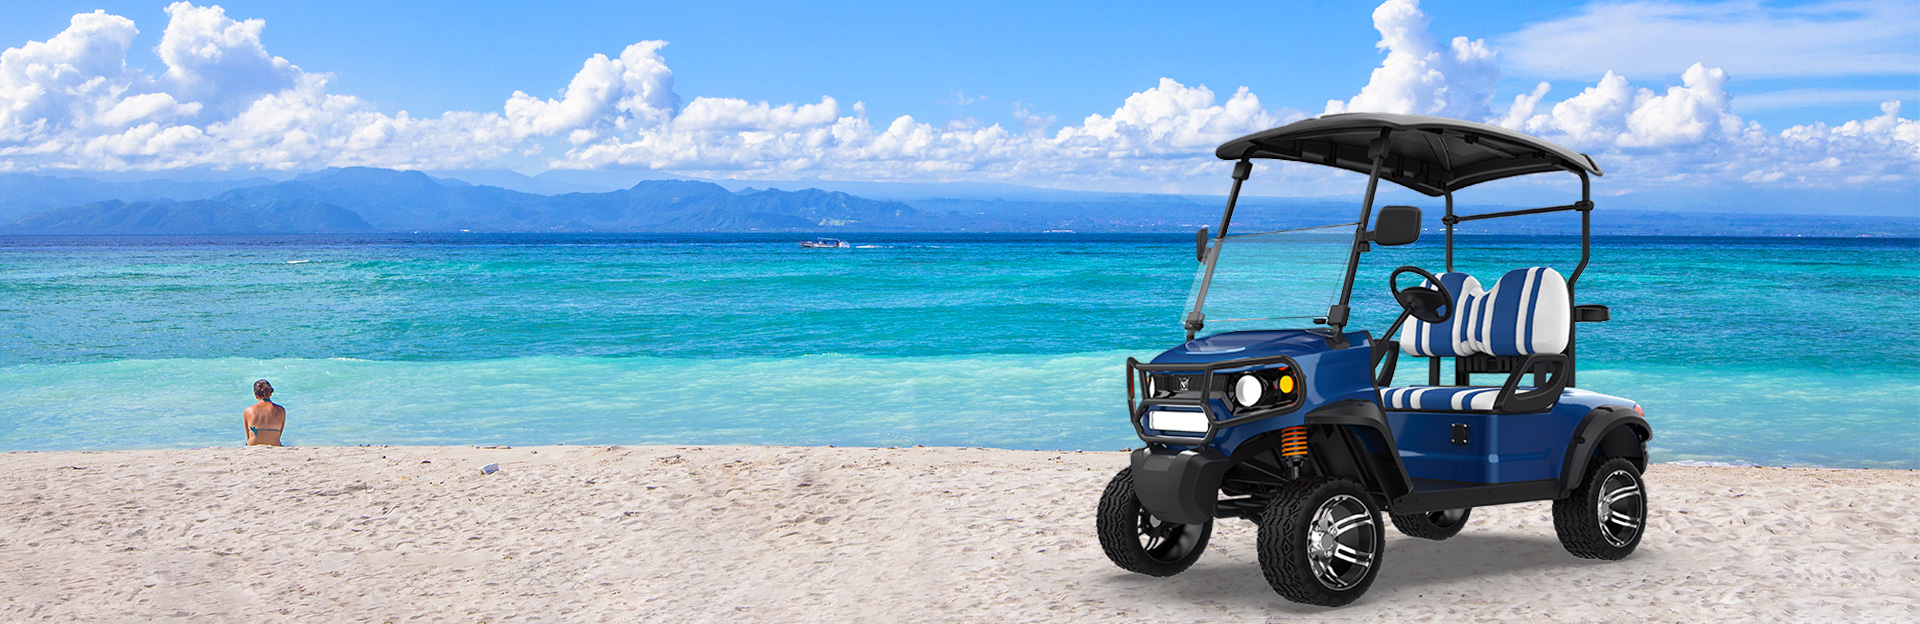 Introducing the Pinnacle of Golf Carts: Unrivaled Performance at Unbeatable Prices!